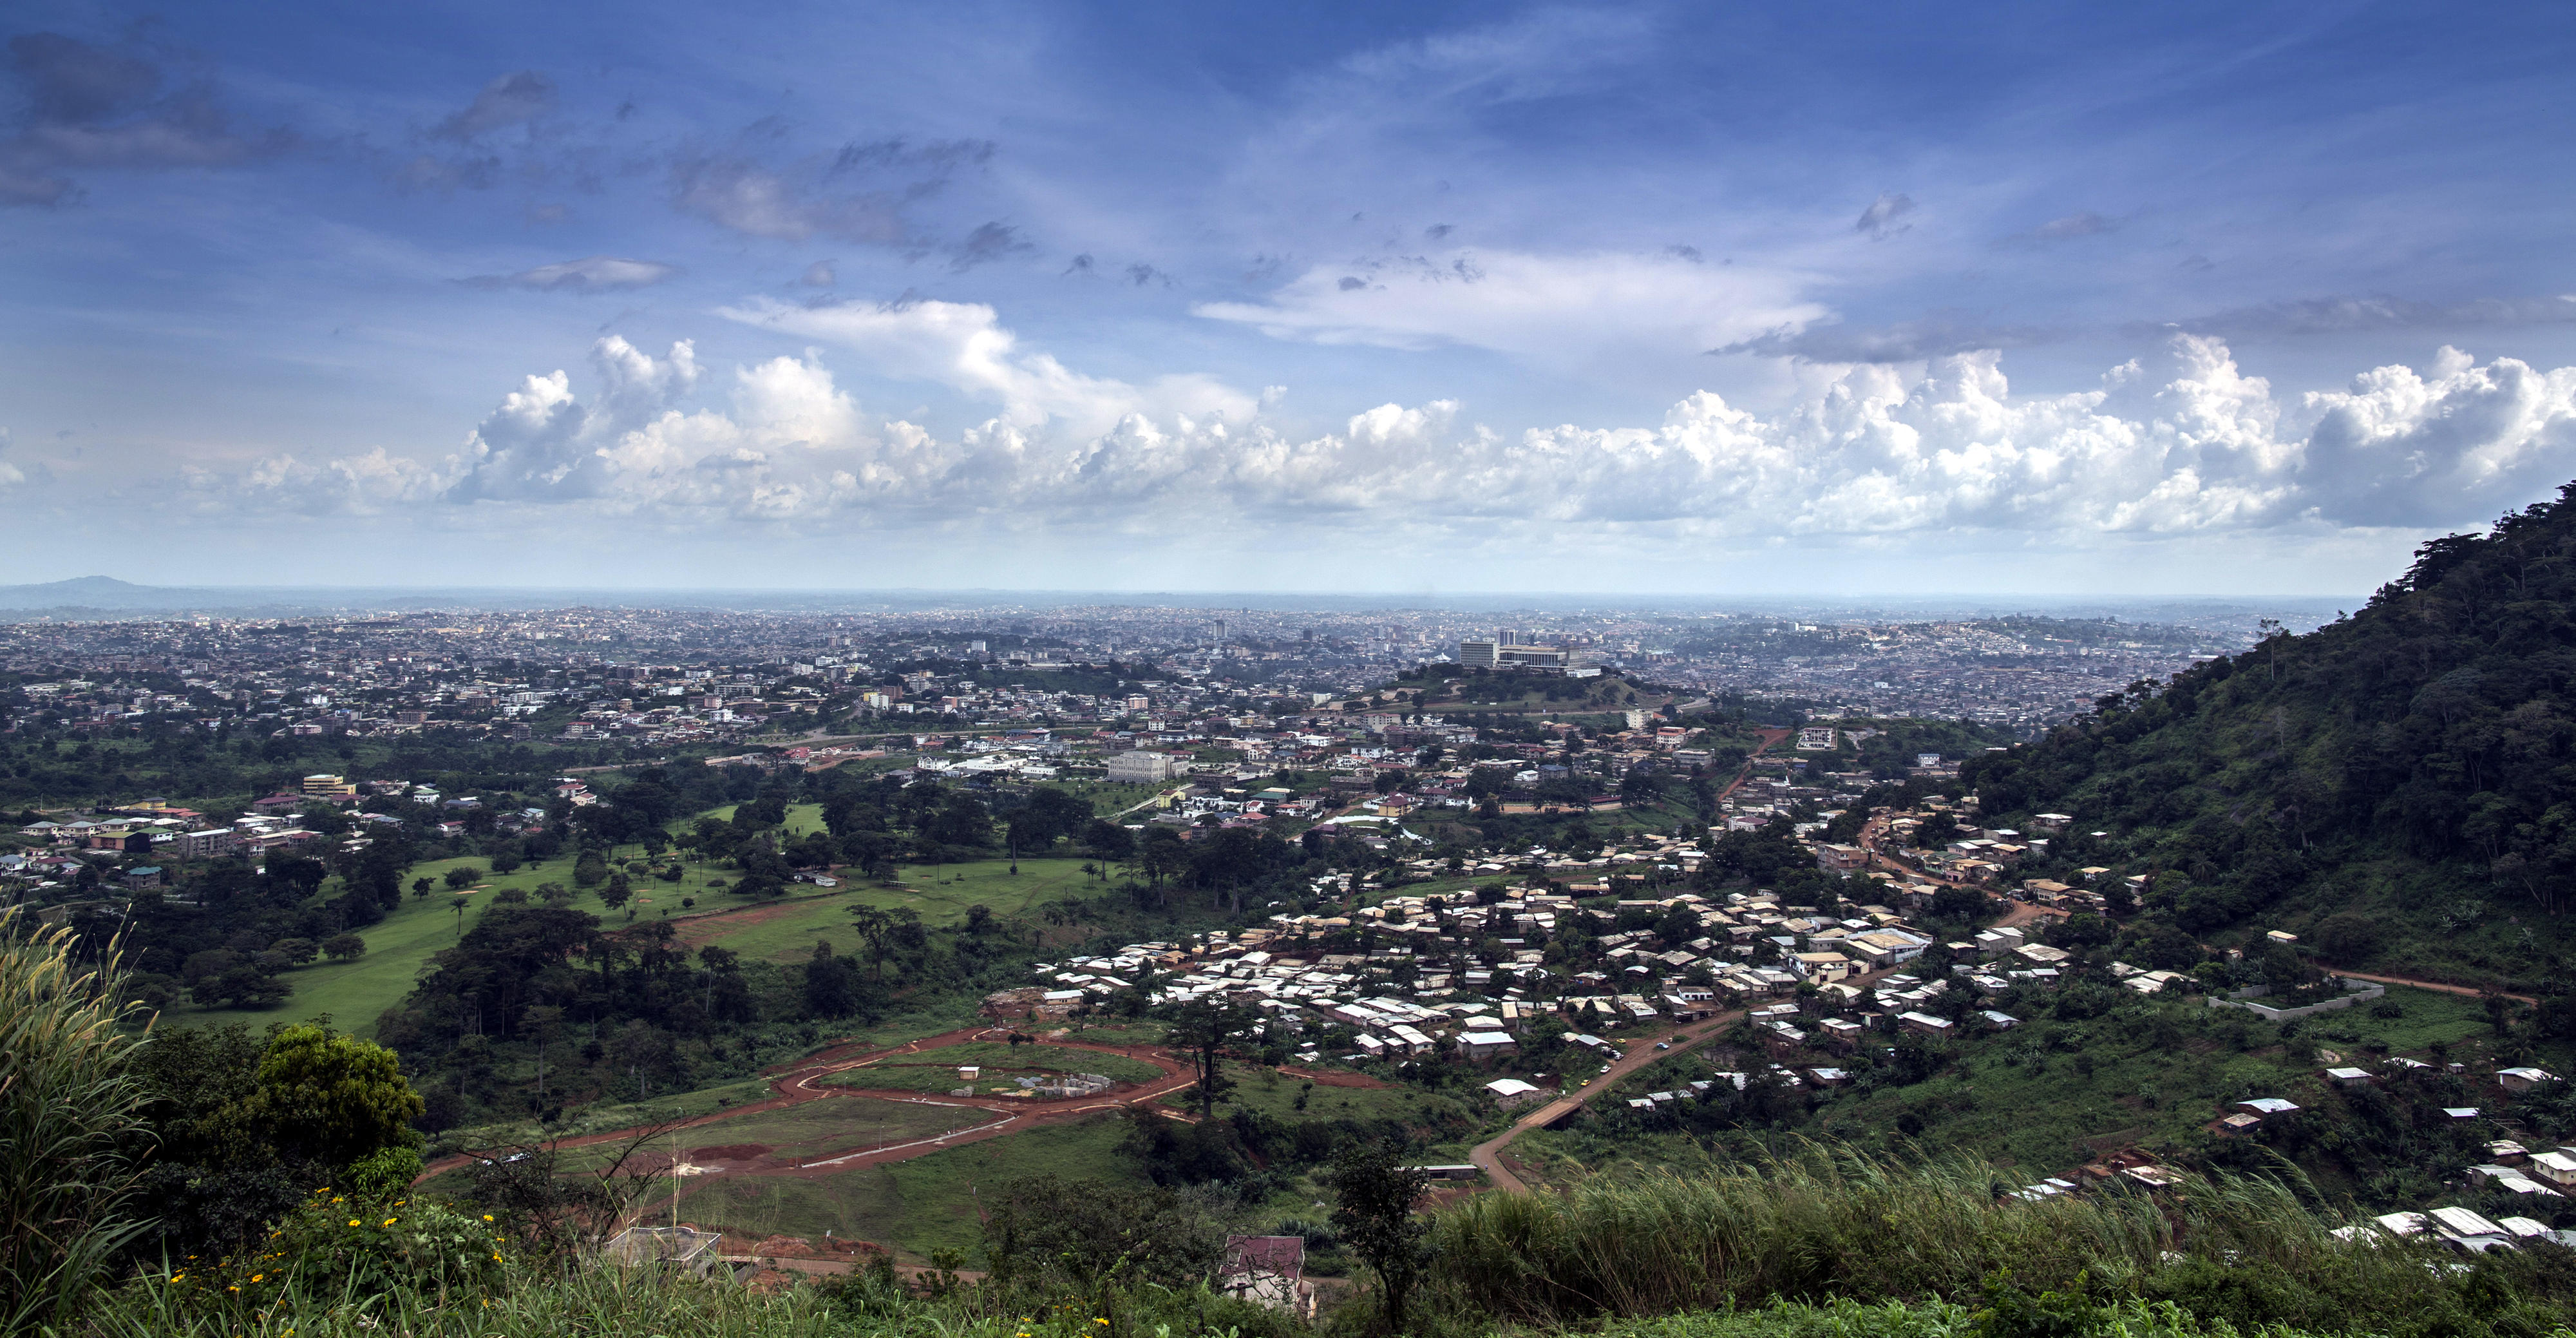 View of Yaounde, capital of Cameroon